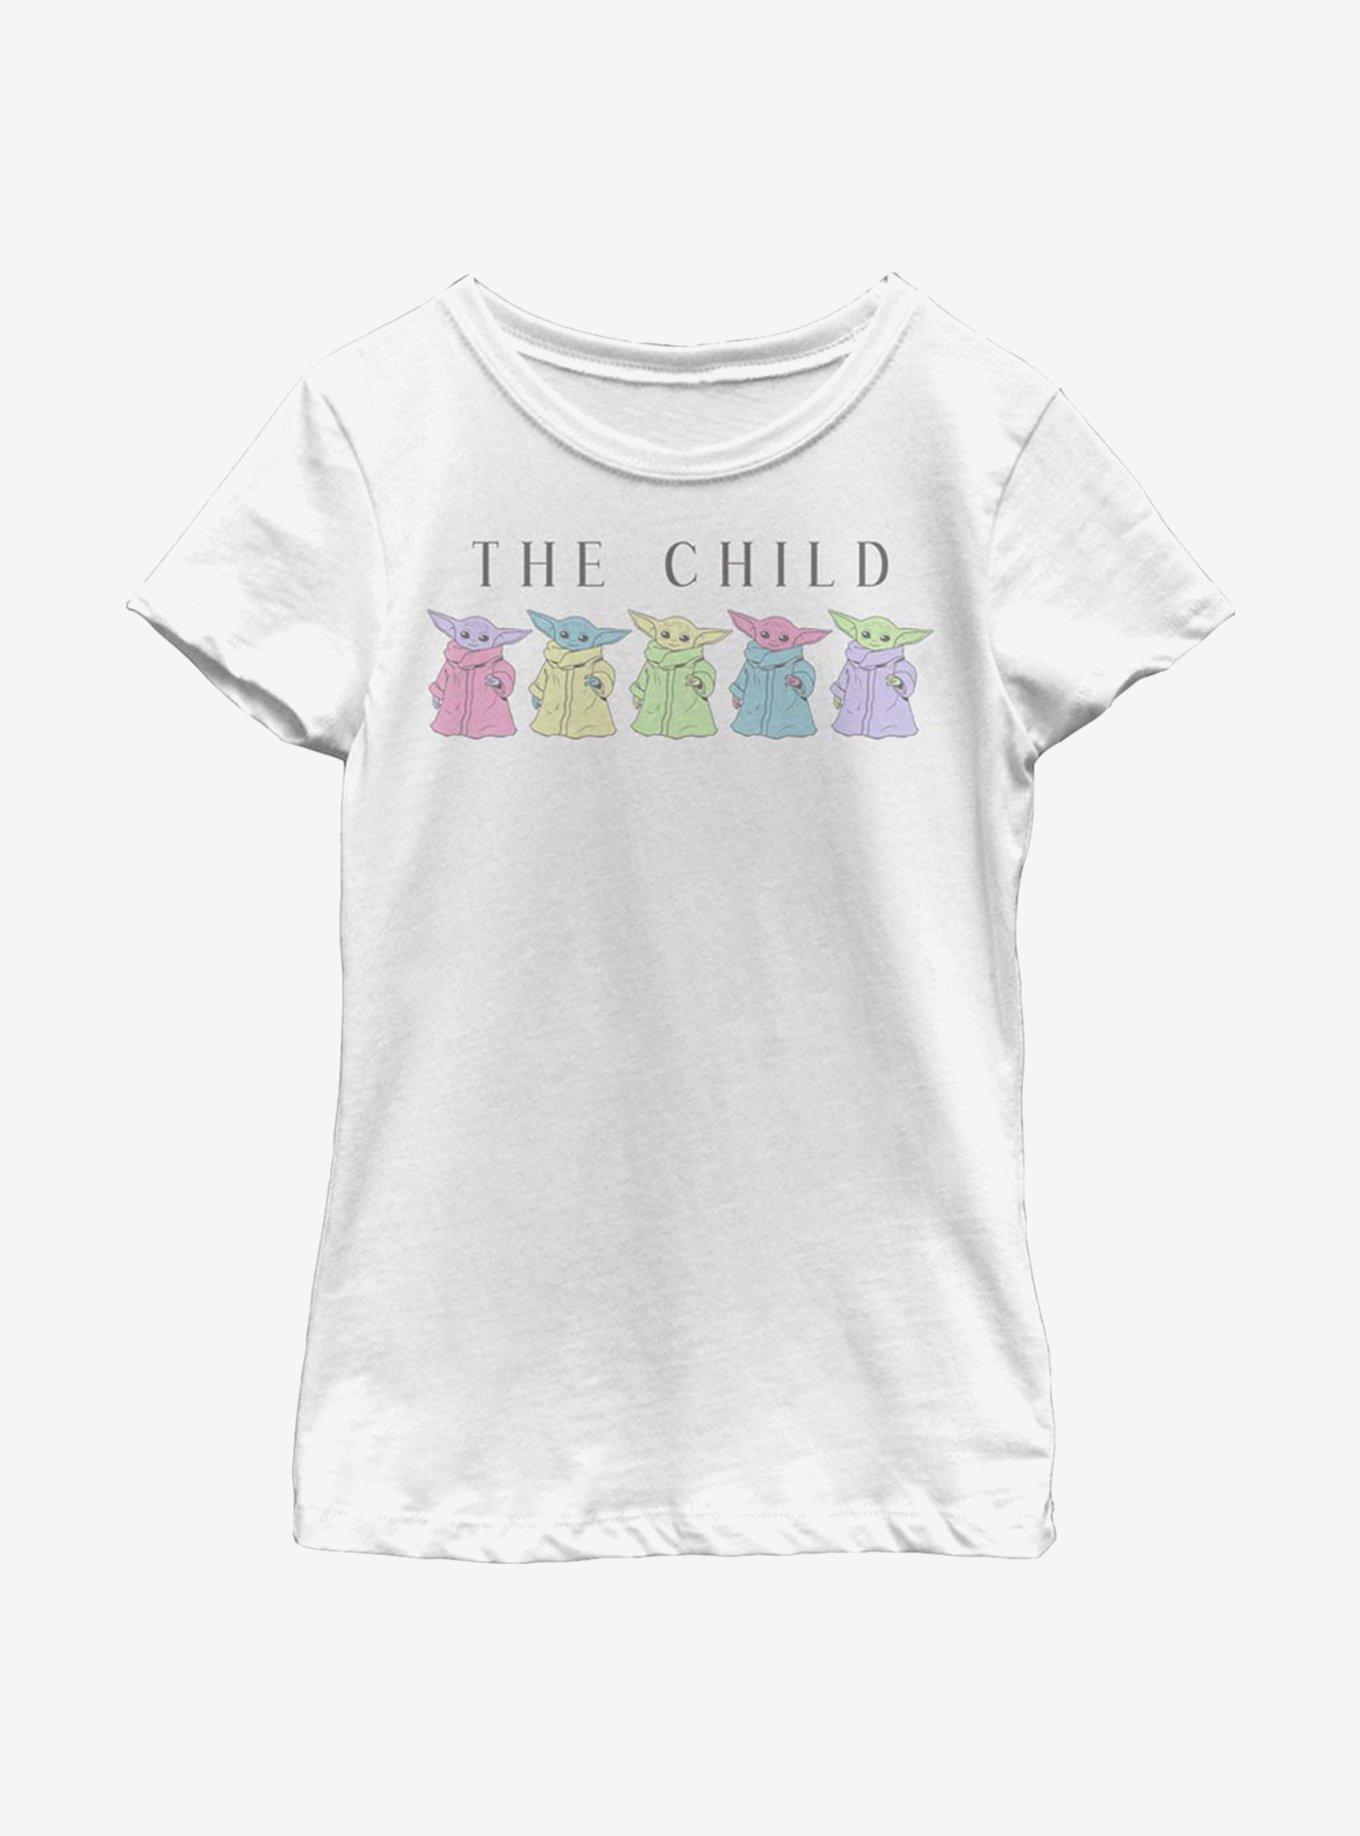 Star Wars The Mandalorian The Child Colors Youth Girls T-Shirt, WHITE, hi-res